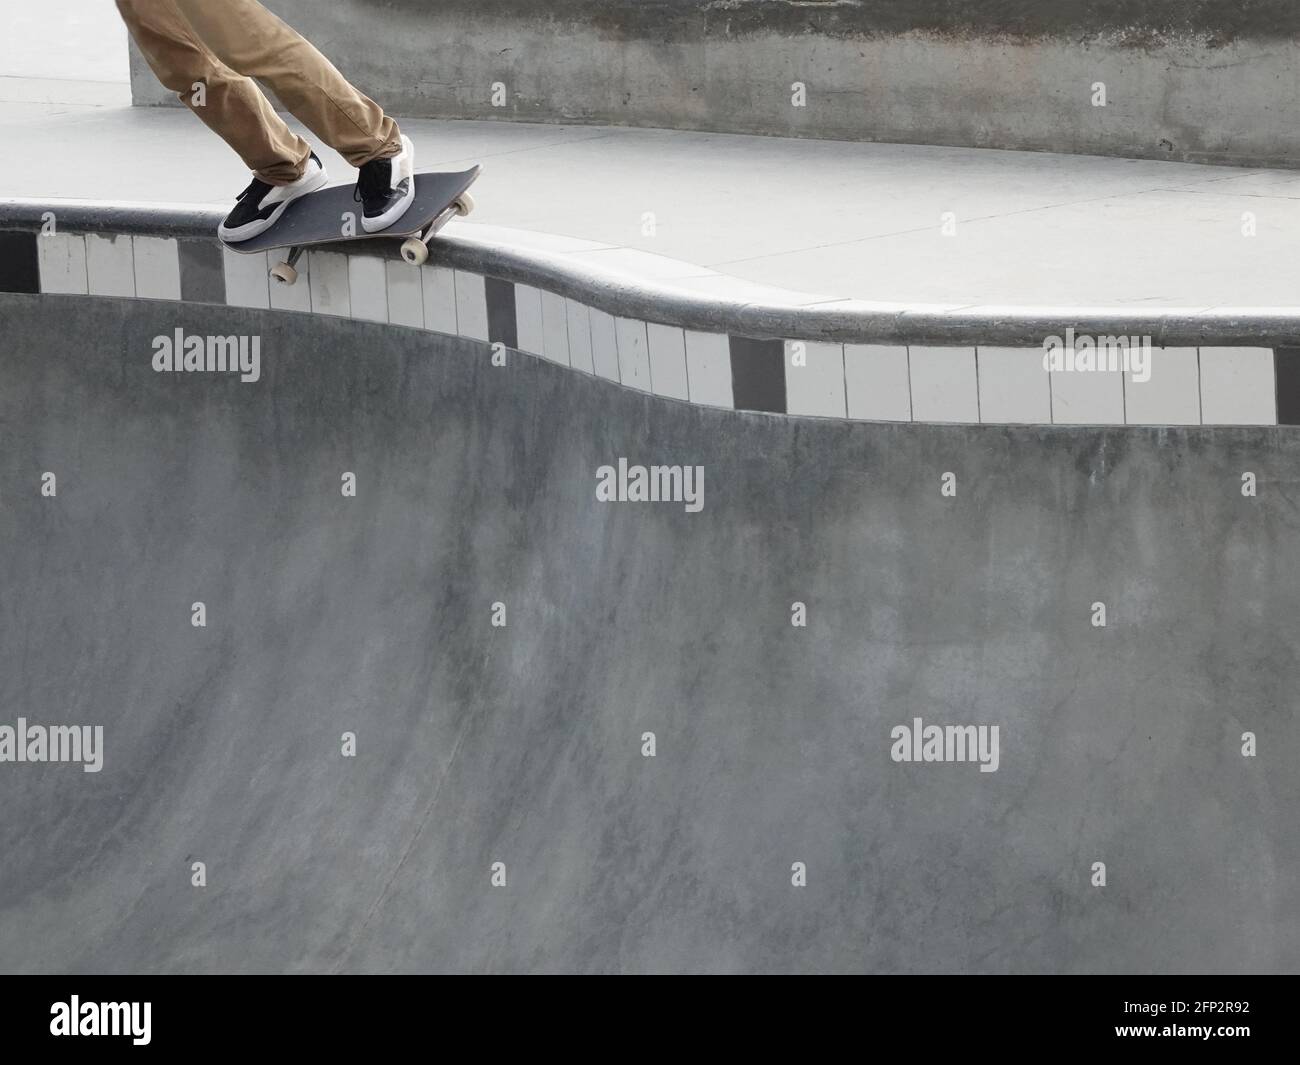 The legs and feet of a skateboarder are shown as the skateboard trucks grind the rail along a edge of a steep concrete bowl at a skate park. Stock Photo